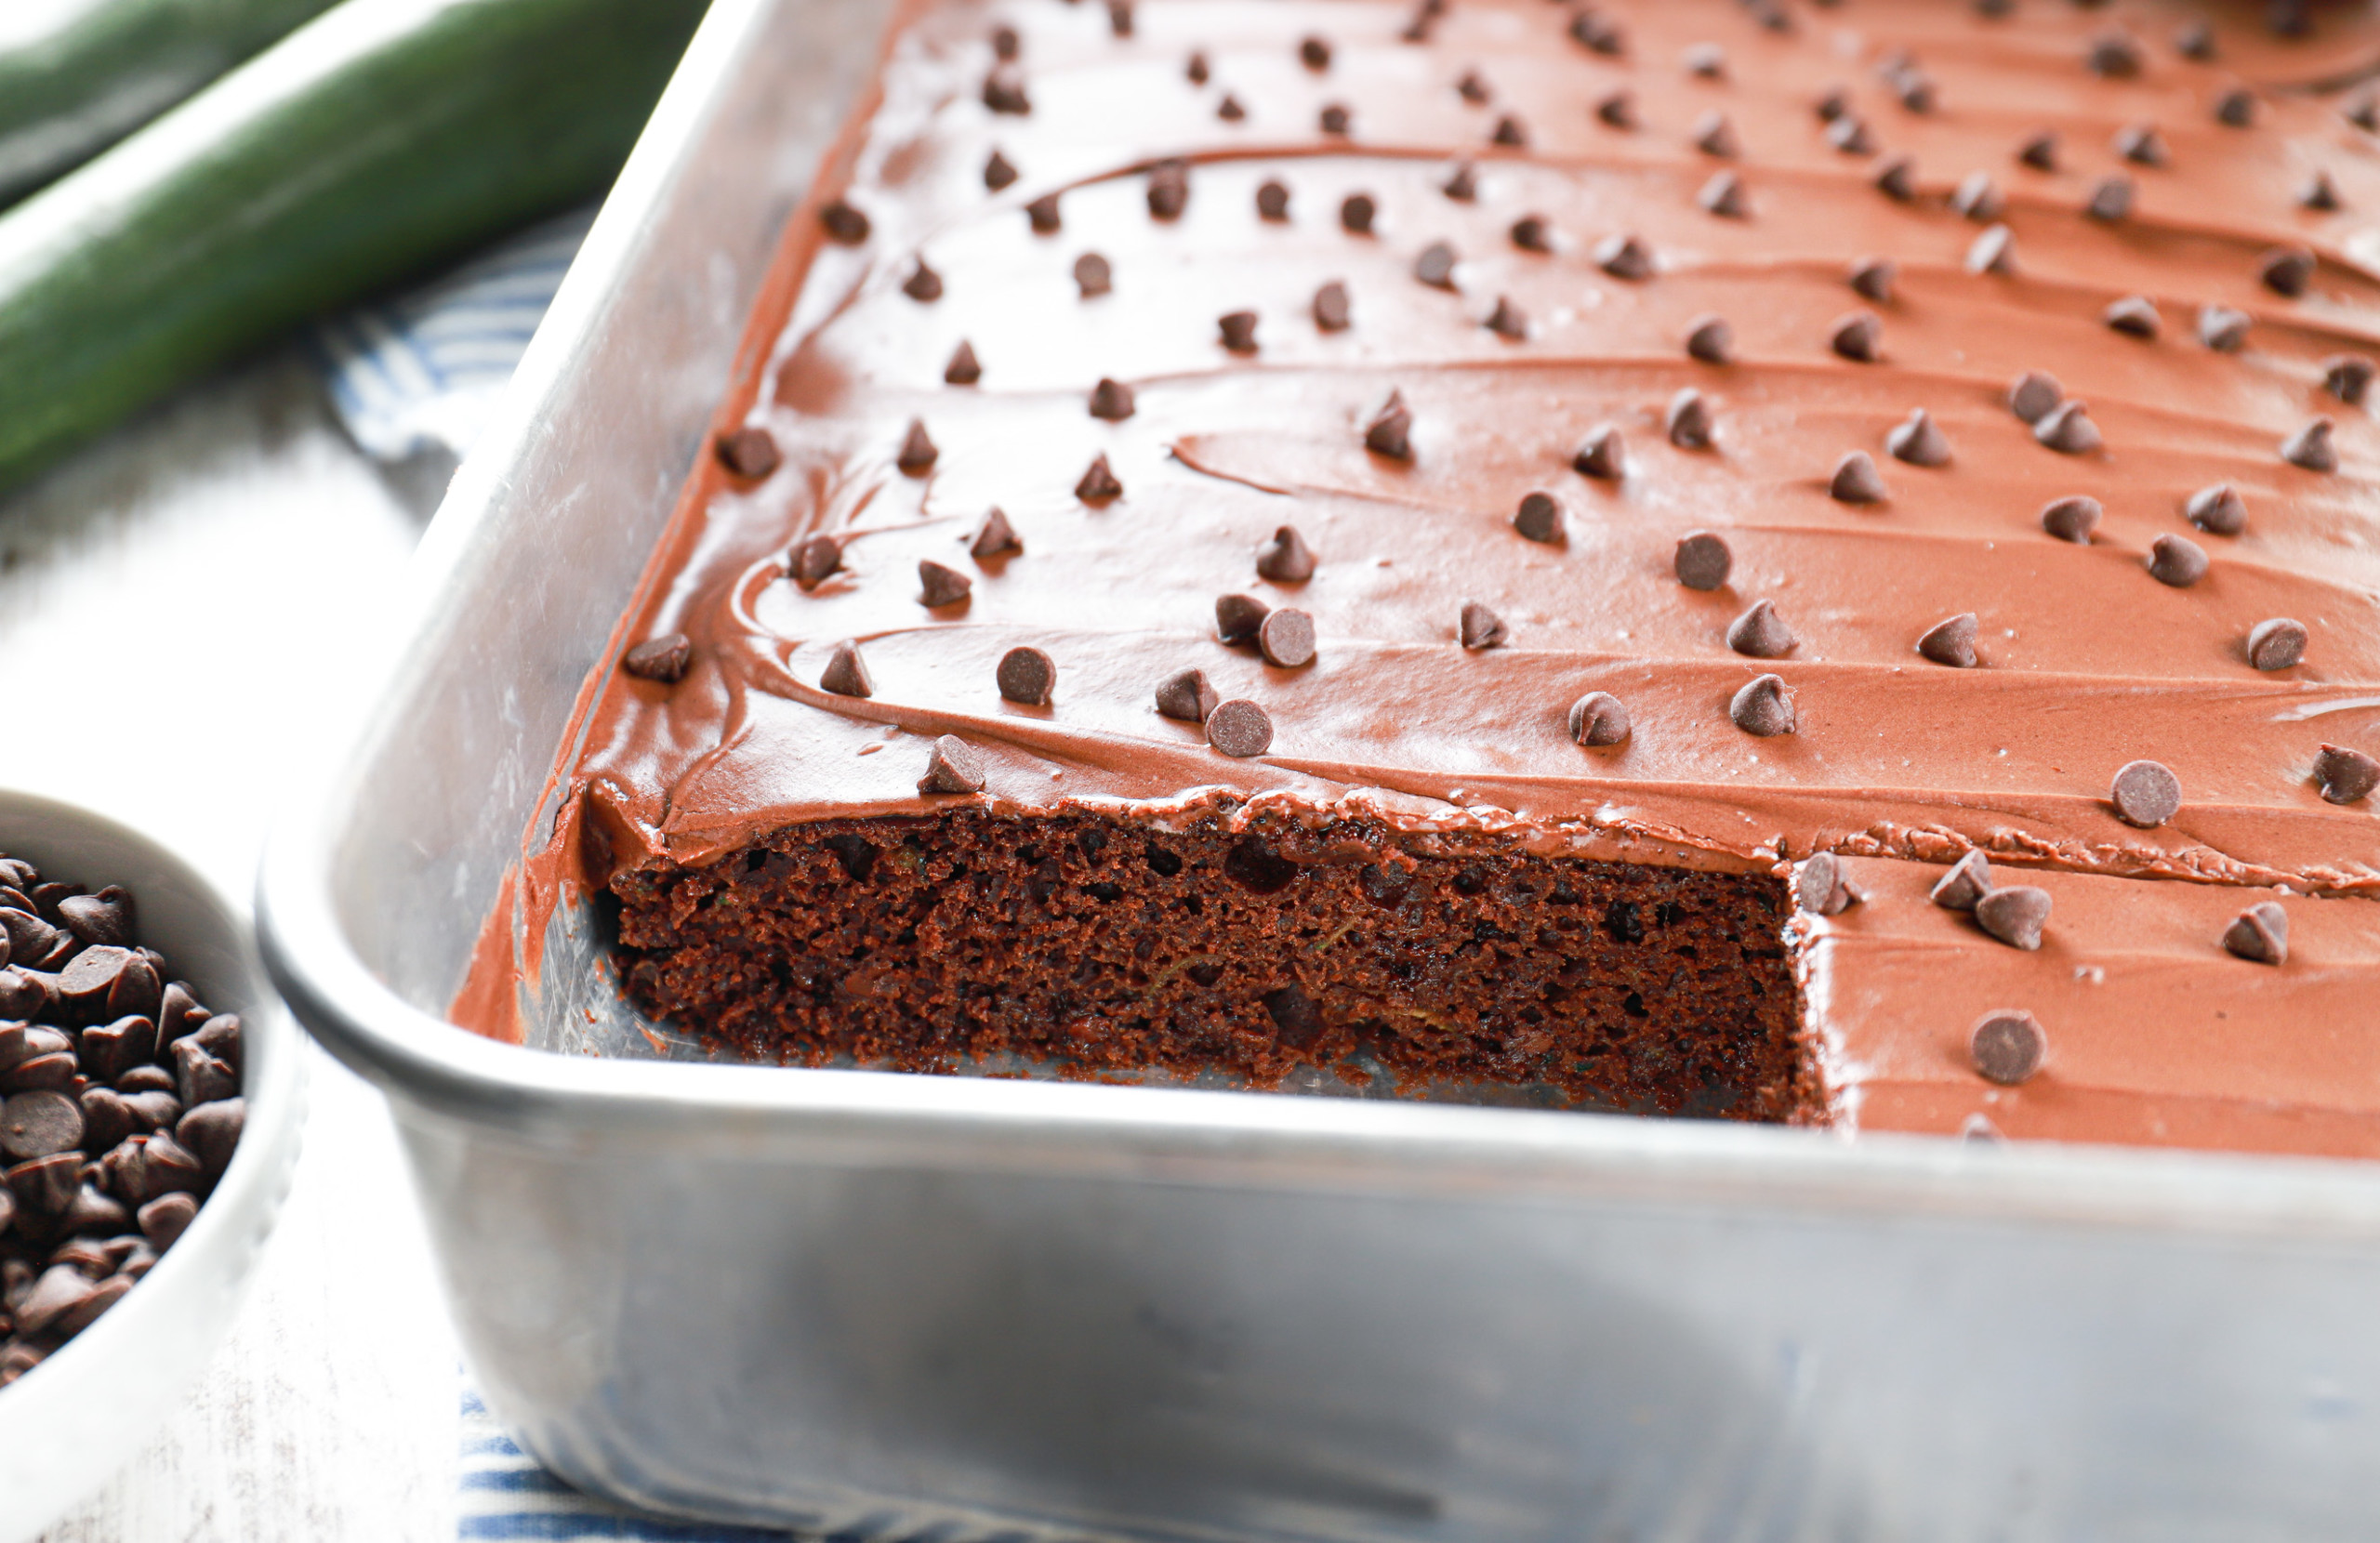 Side view of a row of frosted chocolate zucchini bars in their baking dish.